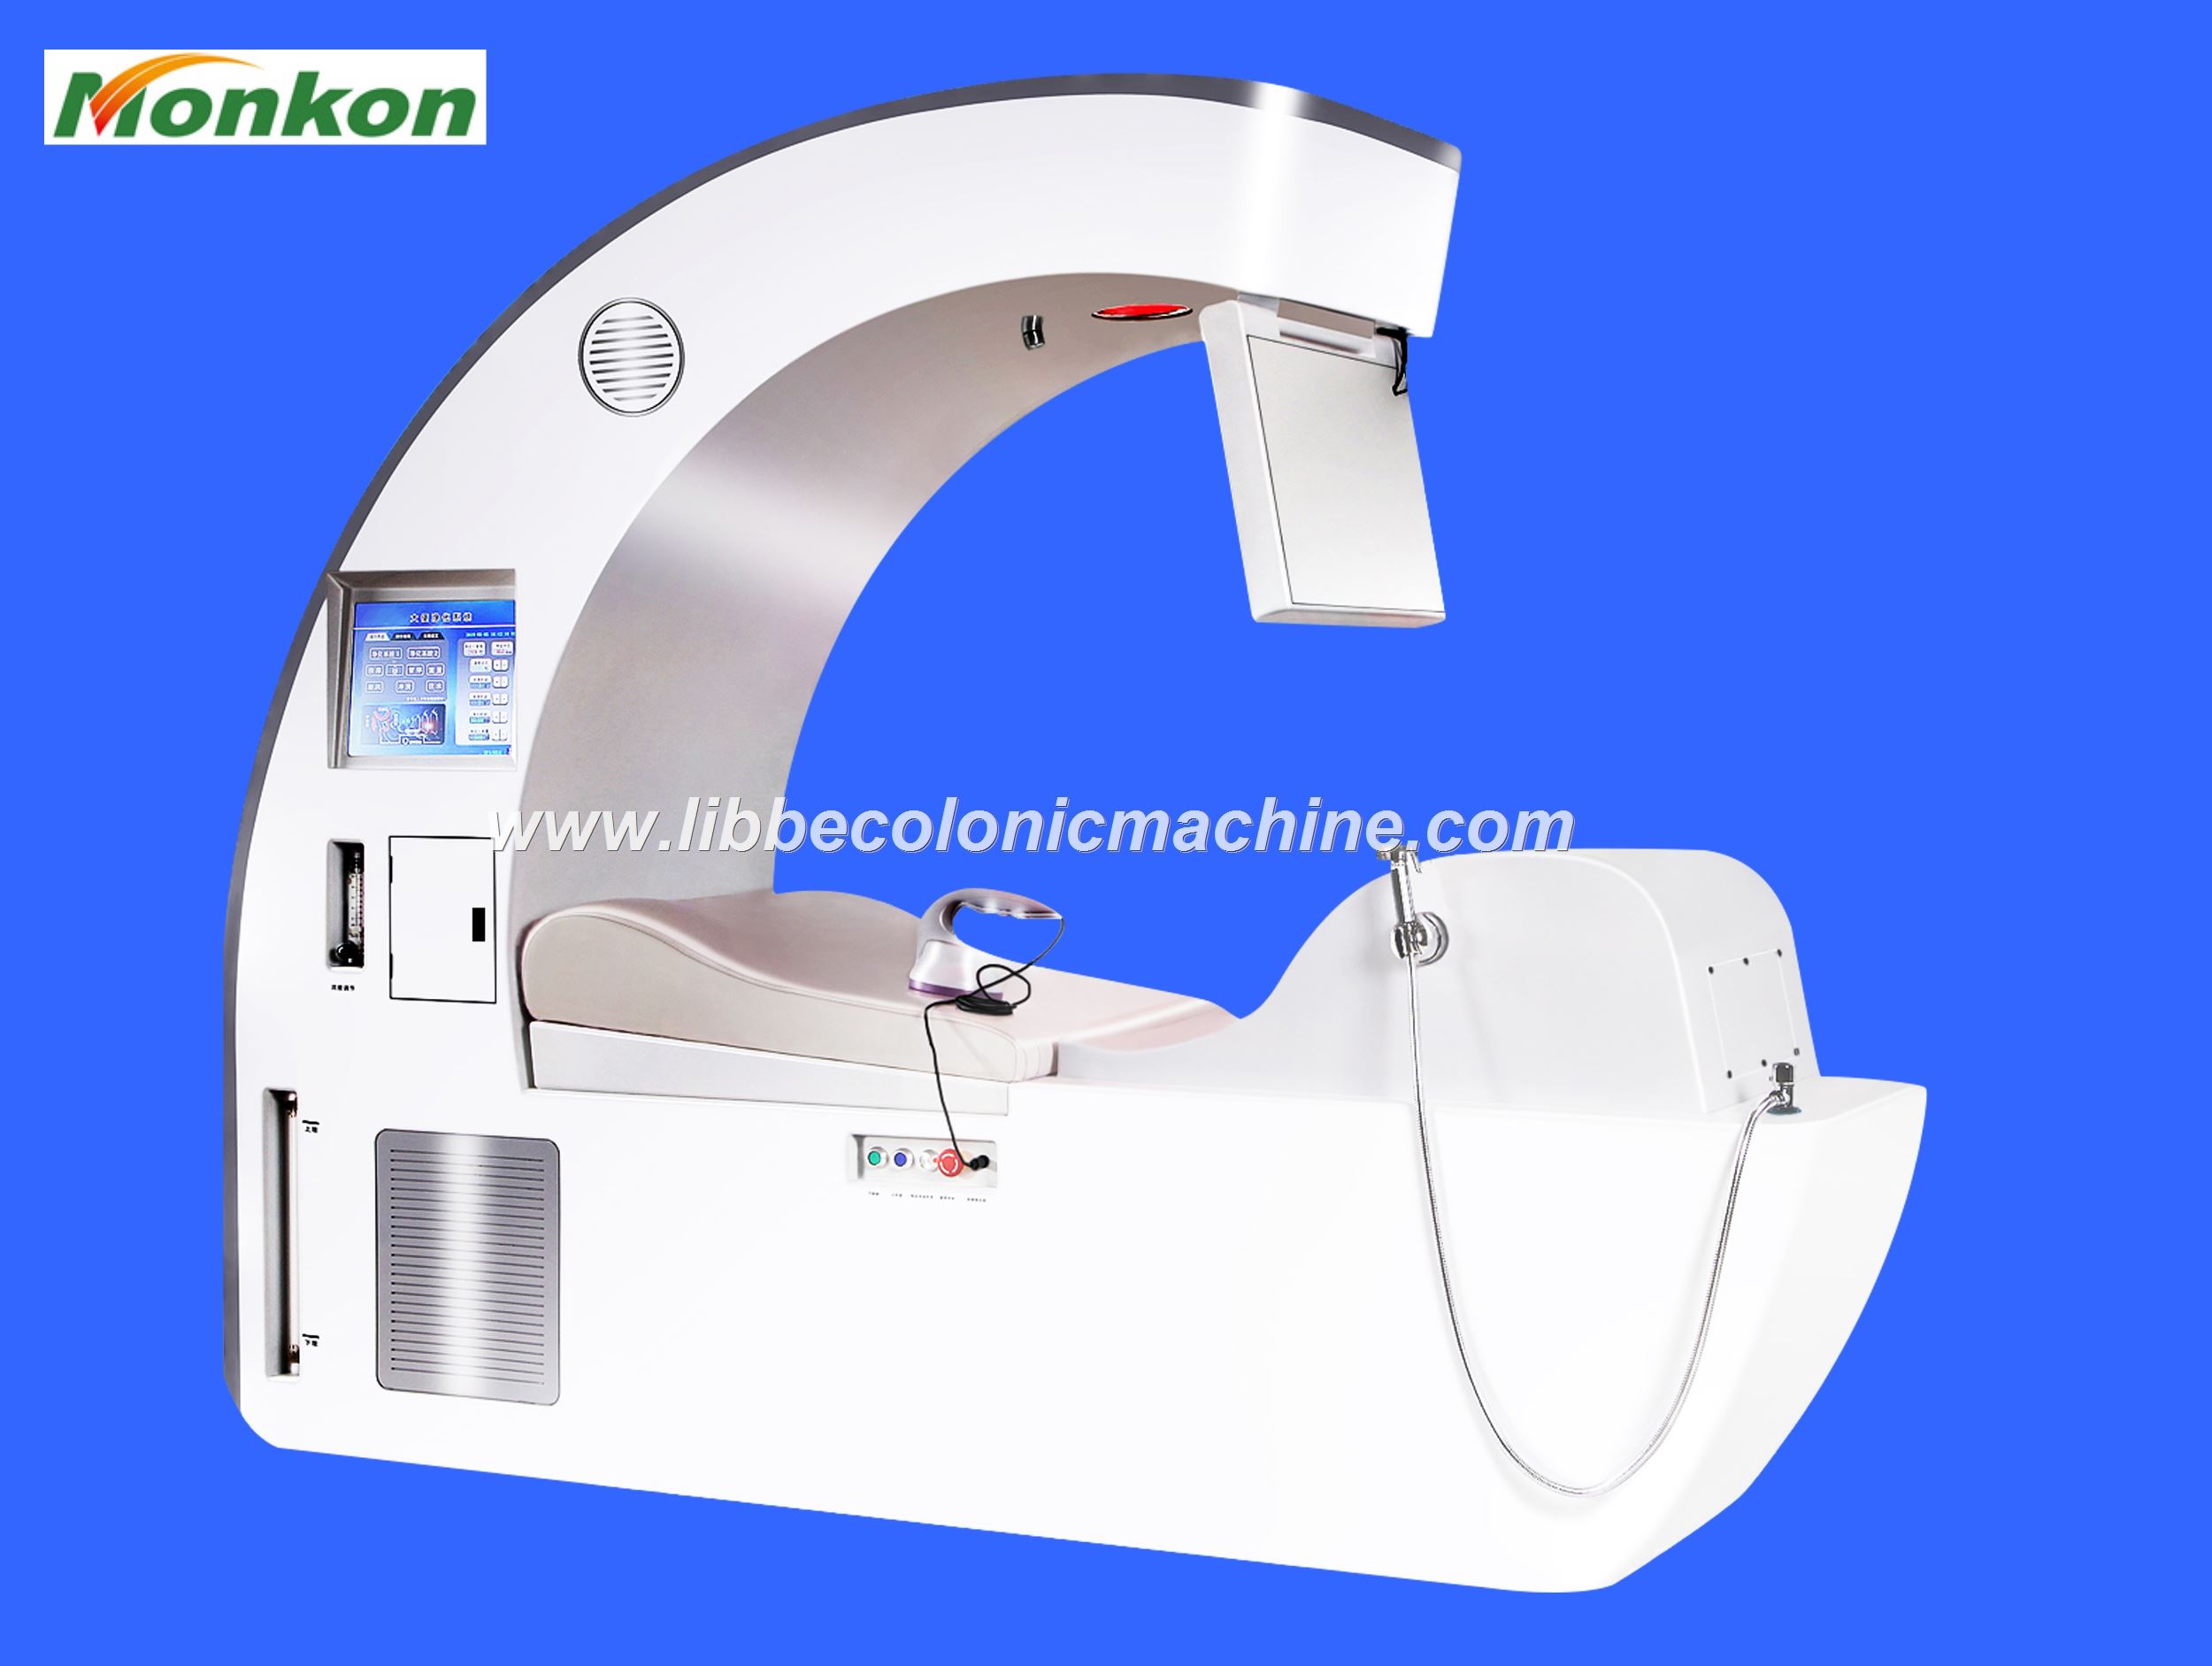 MAIKONG Colonic Cleansing Machines